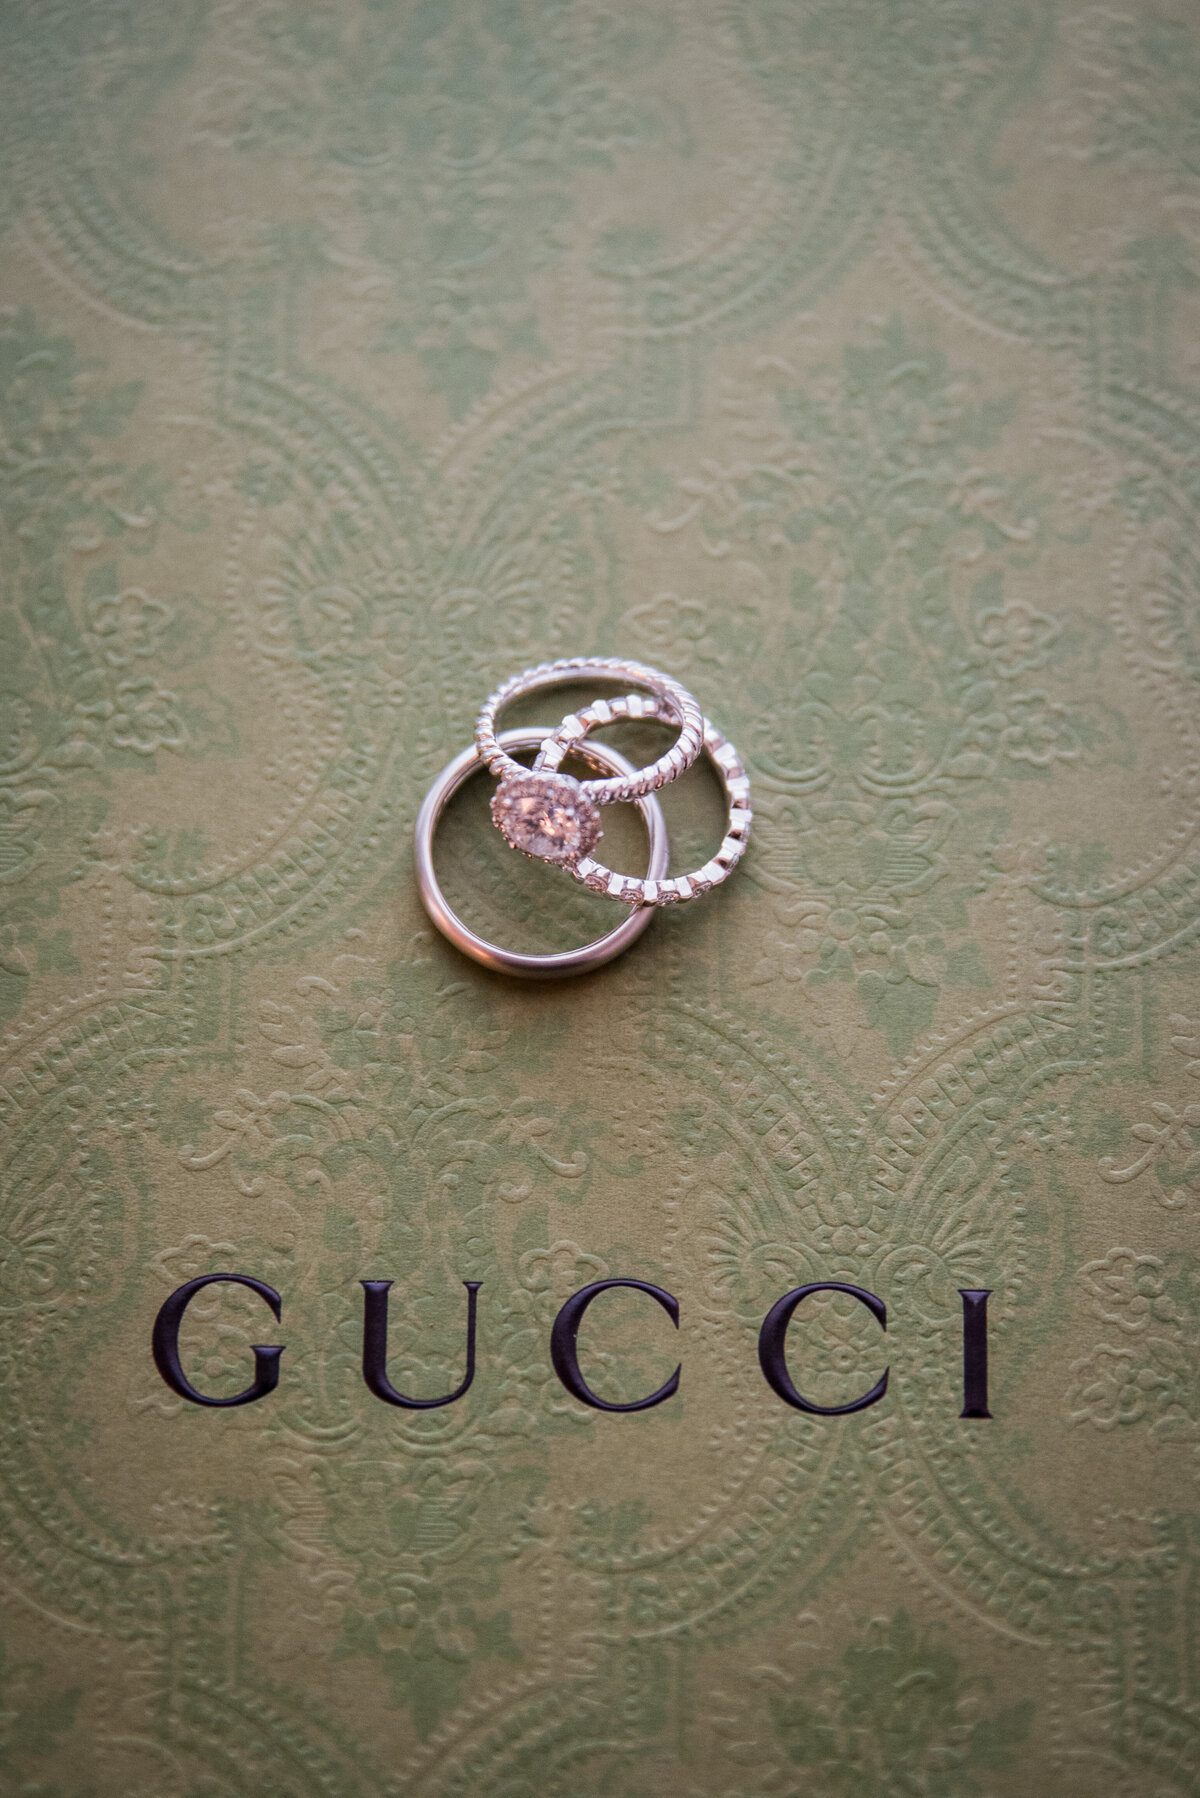 A set of wedding rings sits on a Gucci shoe box.